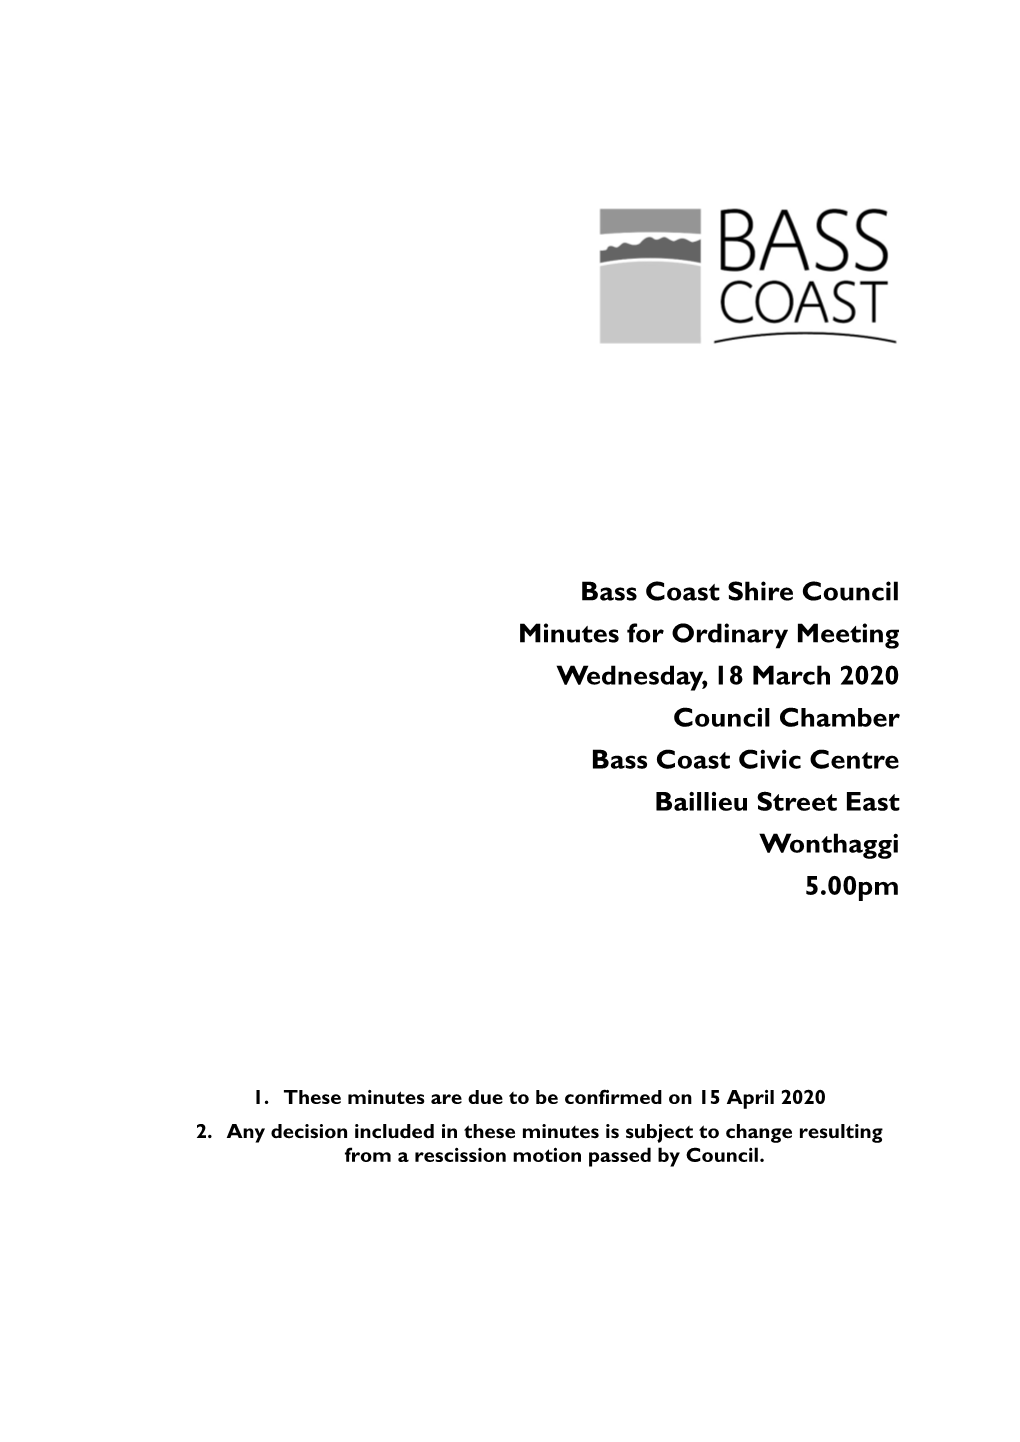 Minutes of Ordinary Meeting - 18 March 2020 Bass Coast Shire Council